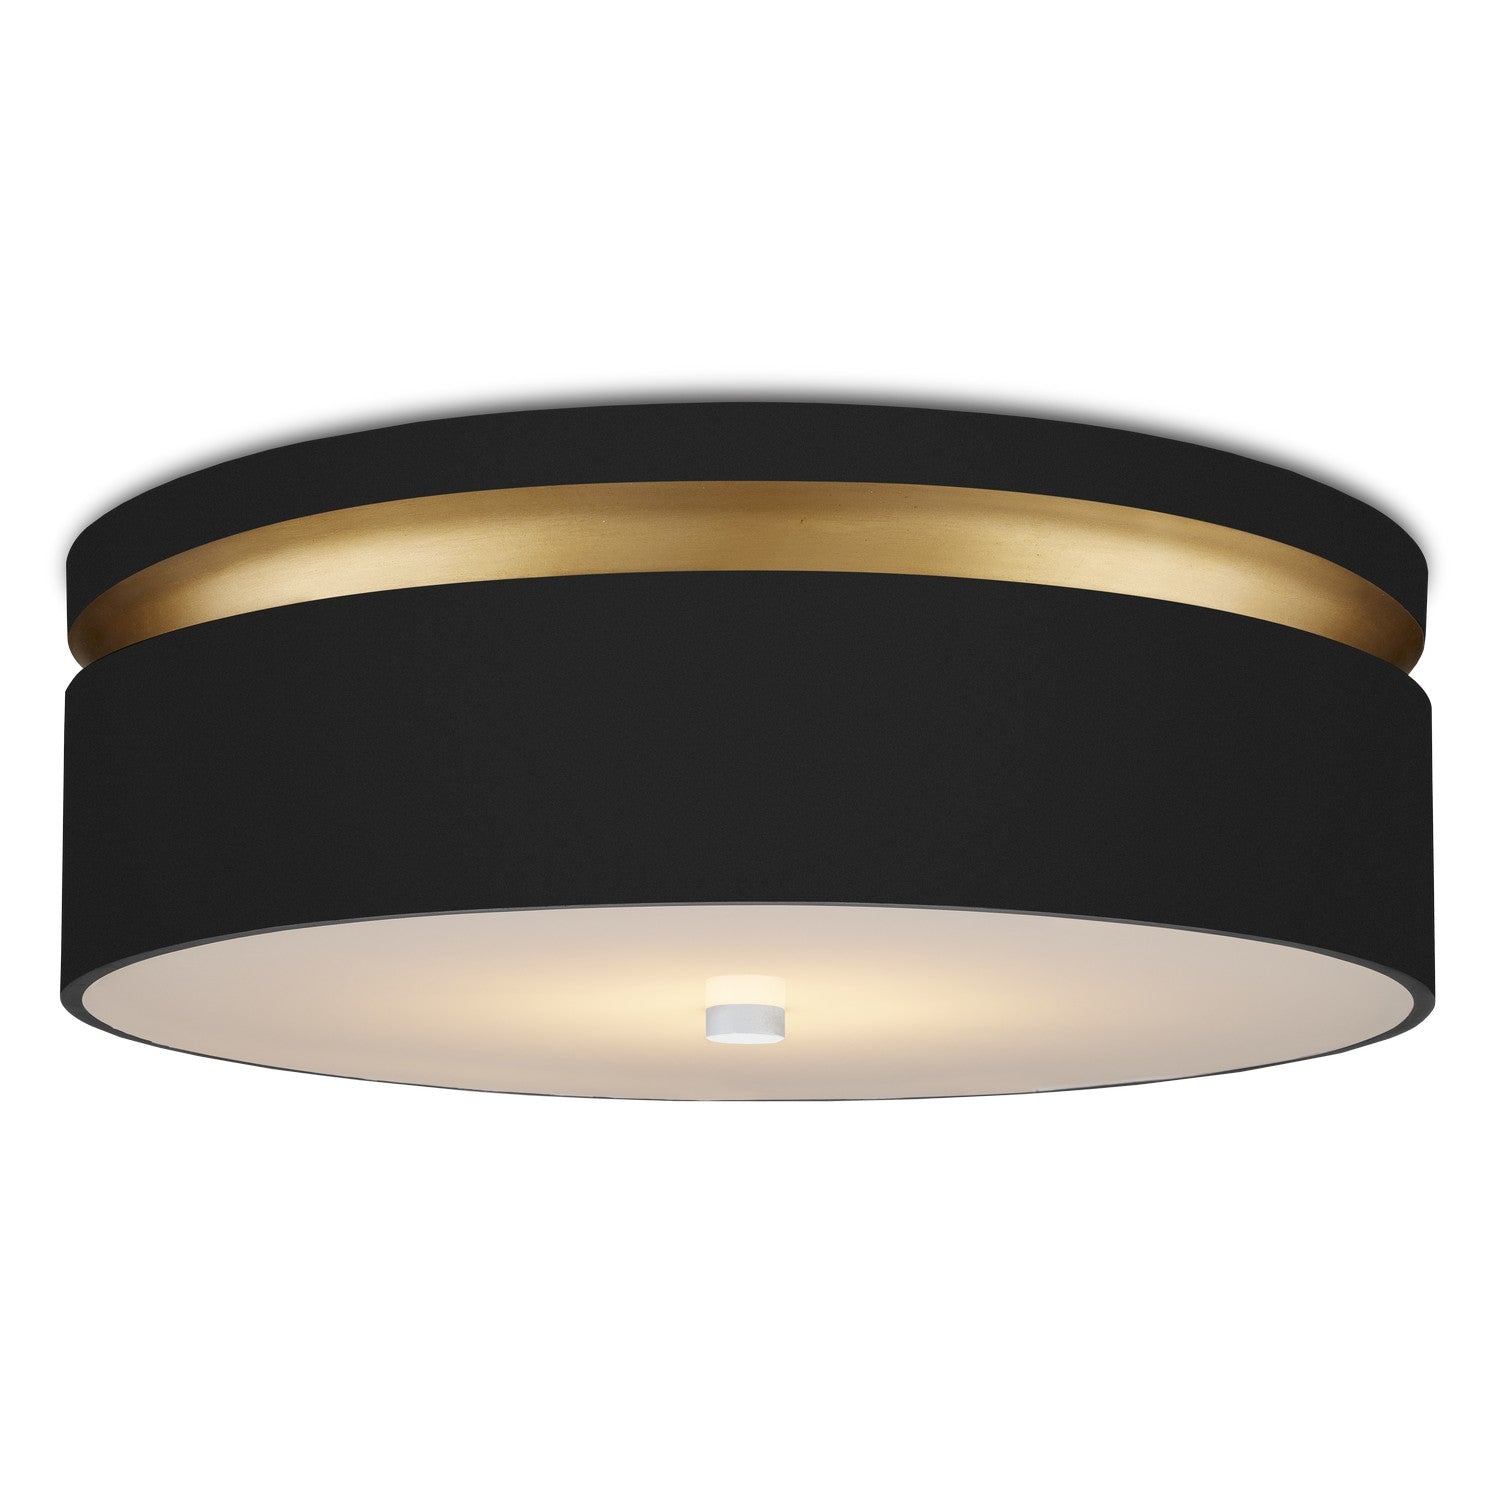 Currey and Company - 9999-0070 - One Light Flush Mount - Serenity - Satin Black/Contemporary Gold/White